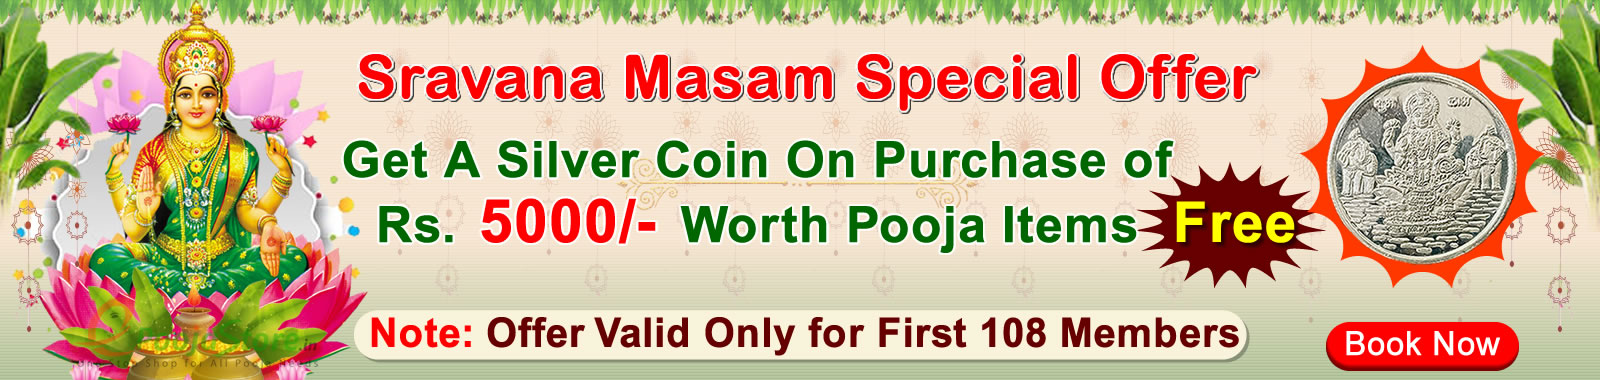 sravanamasam-special-offers